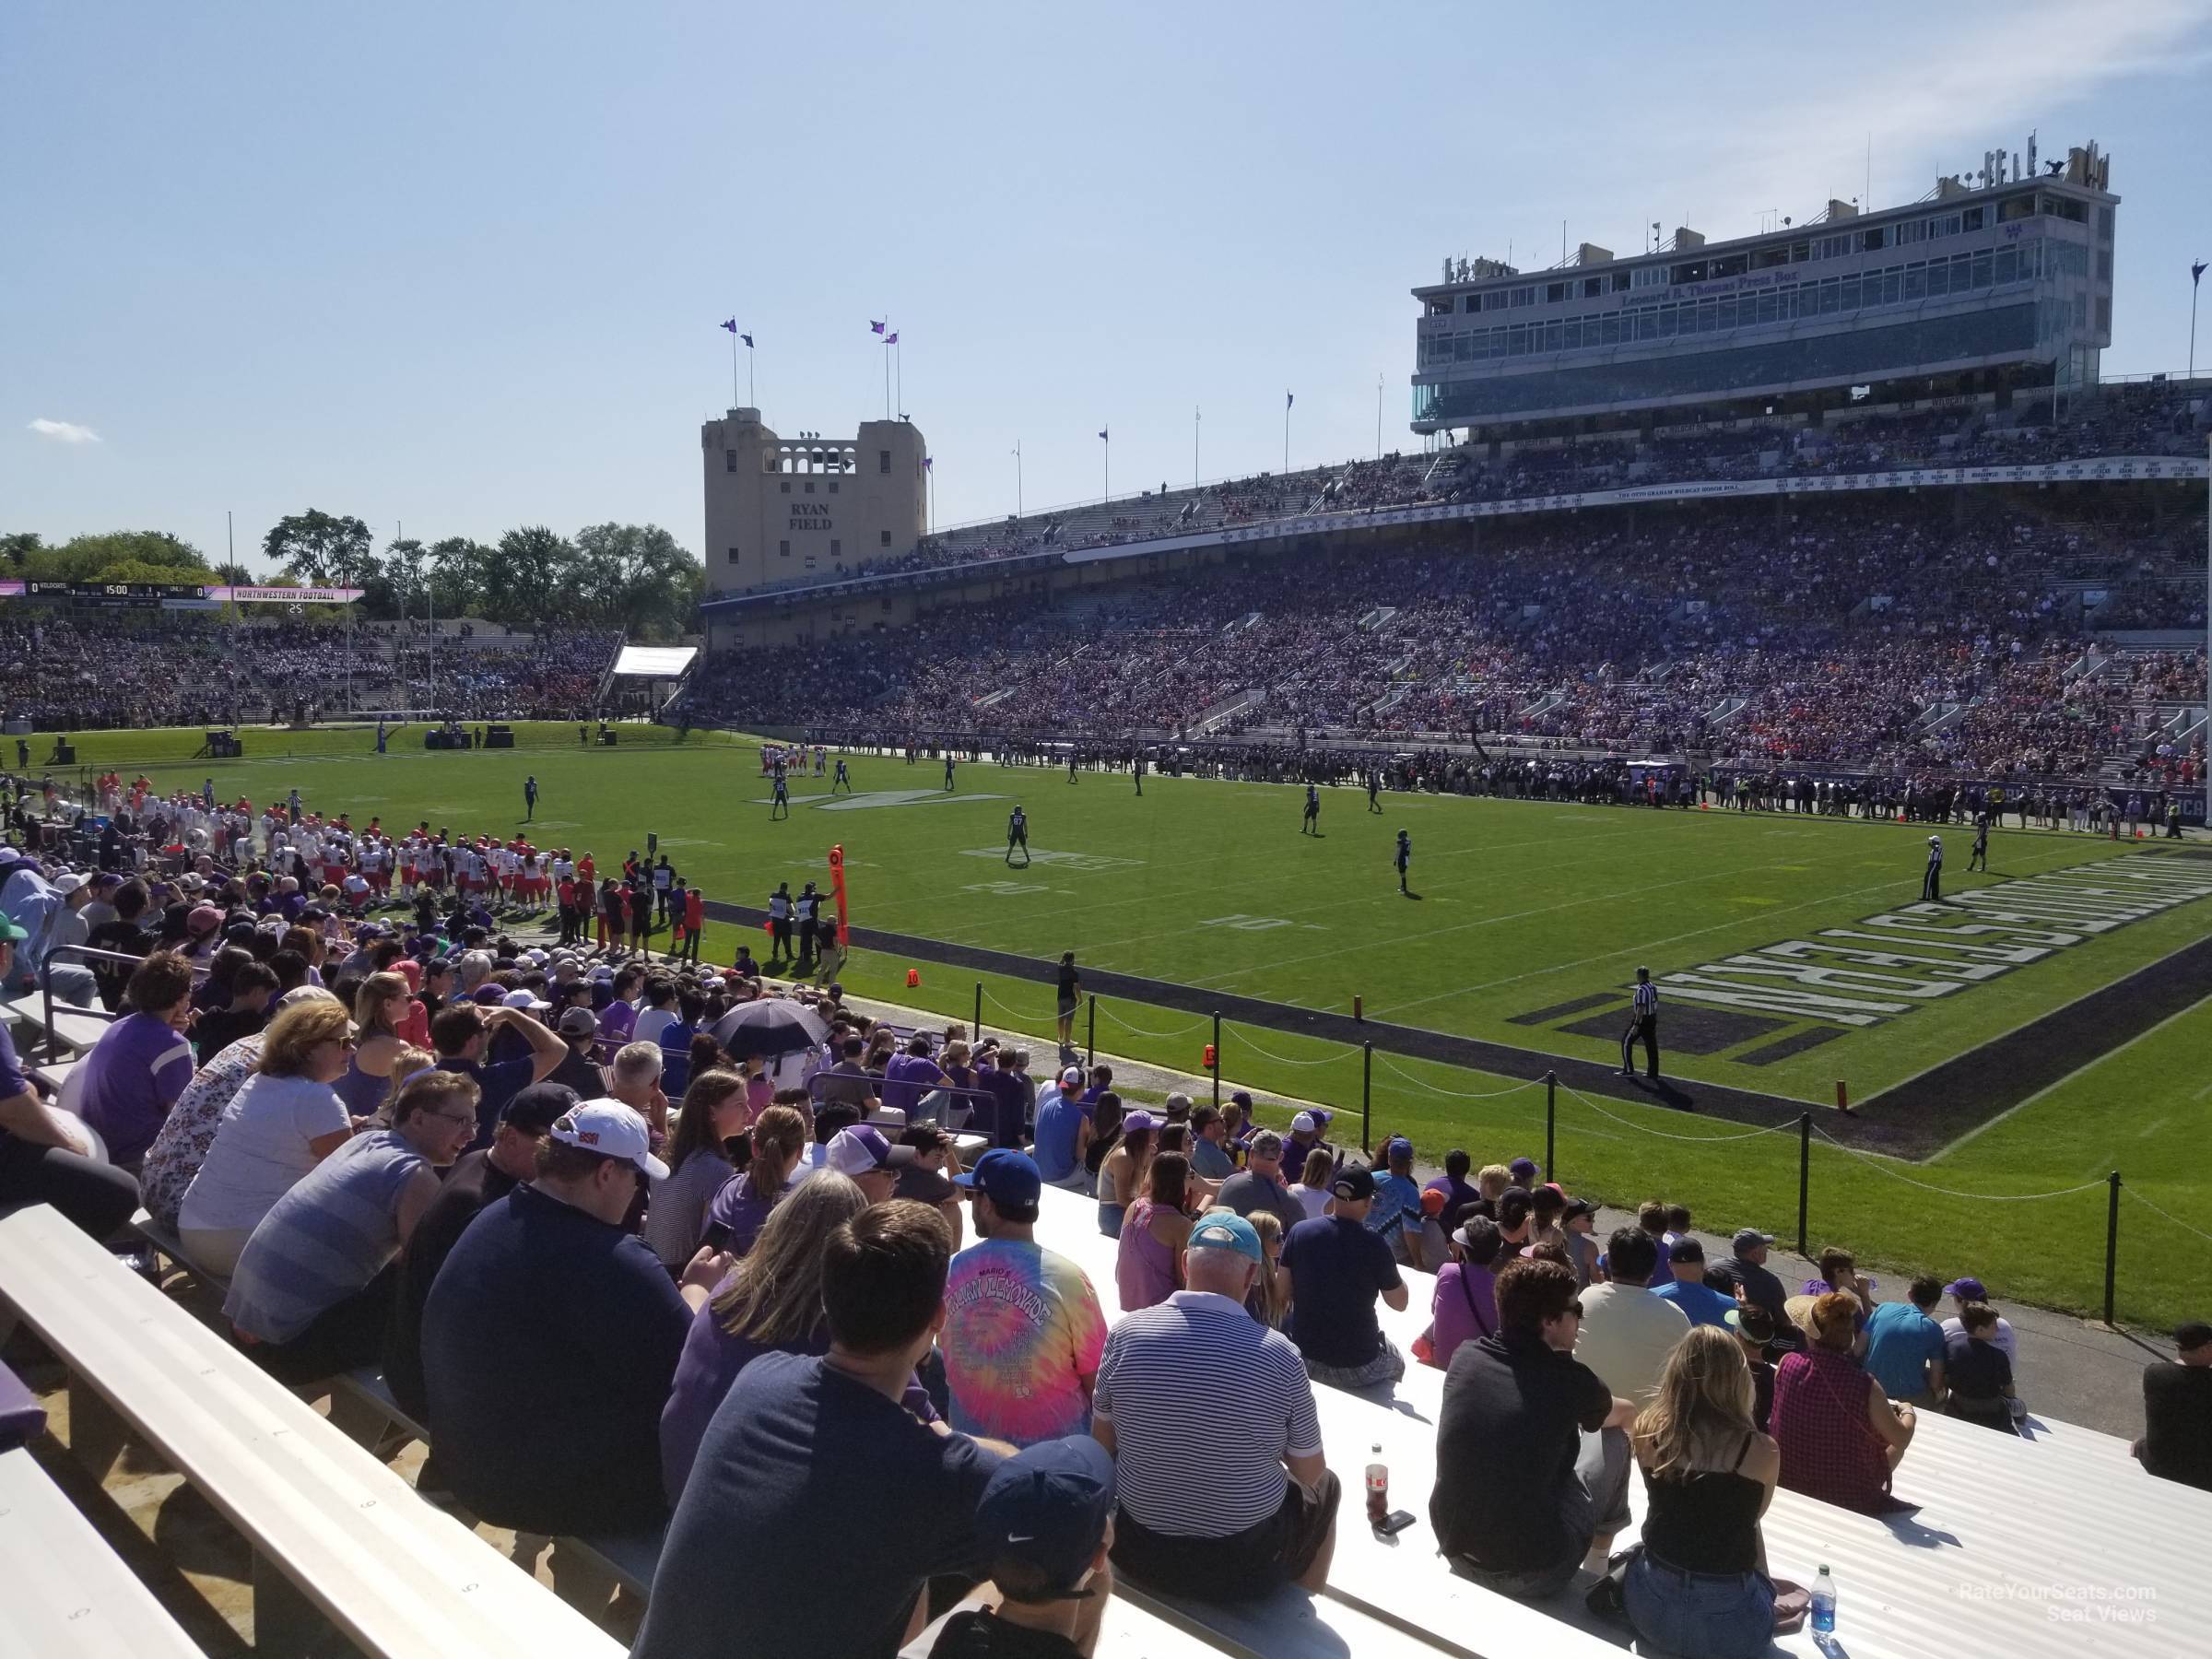 section 102, row 25 seat view  - ryan field